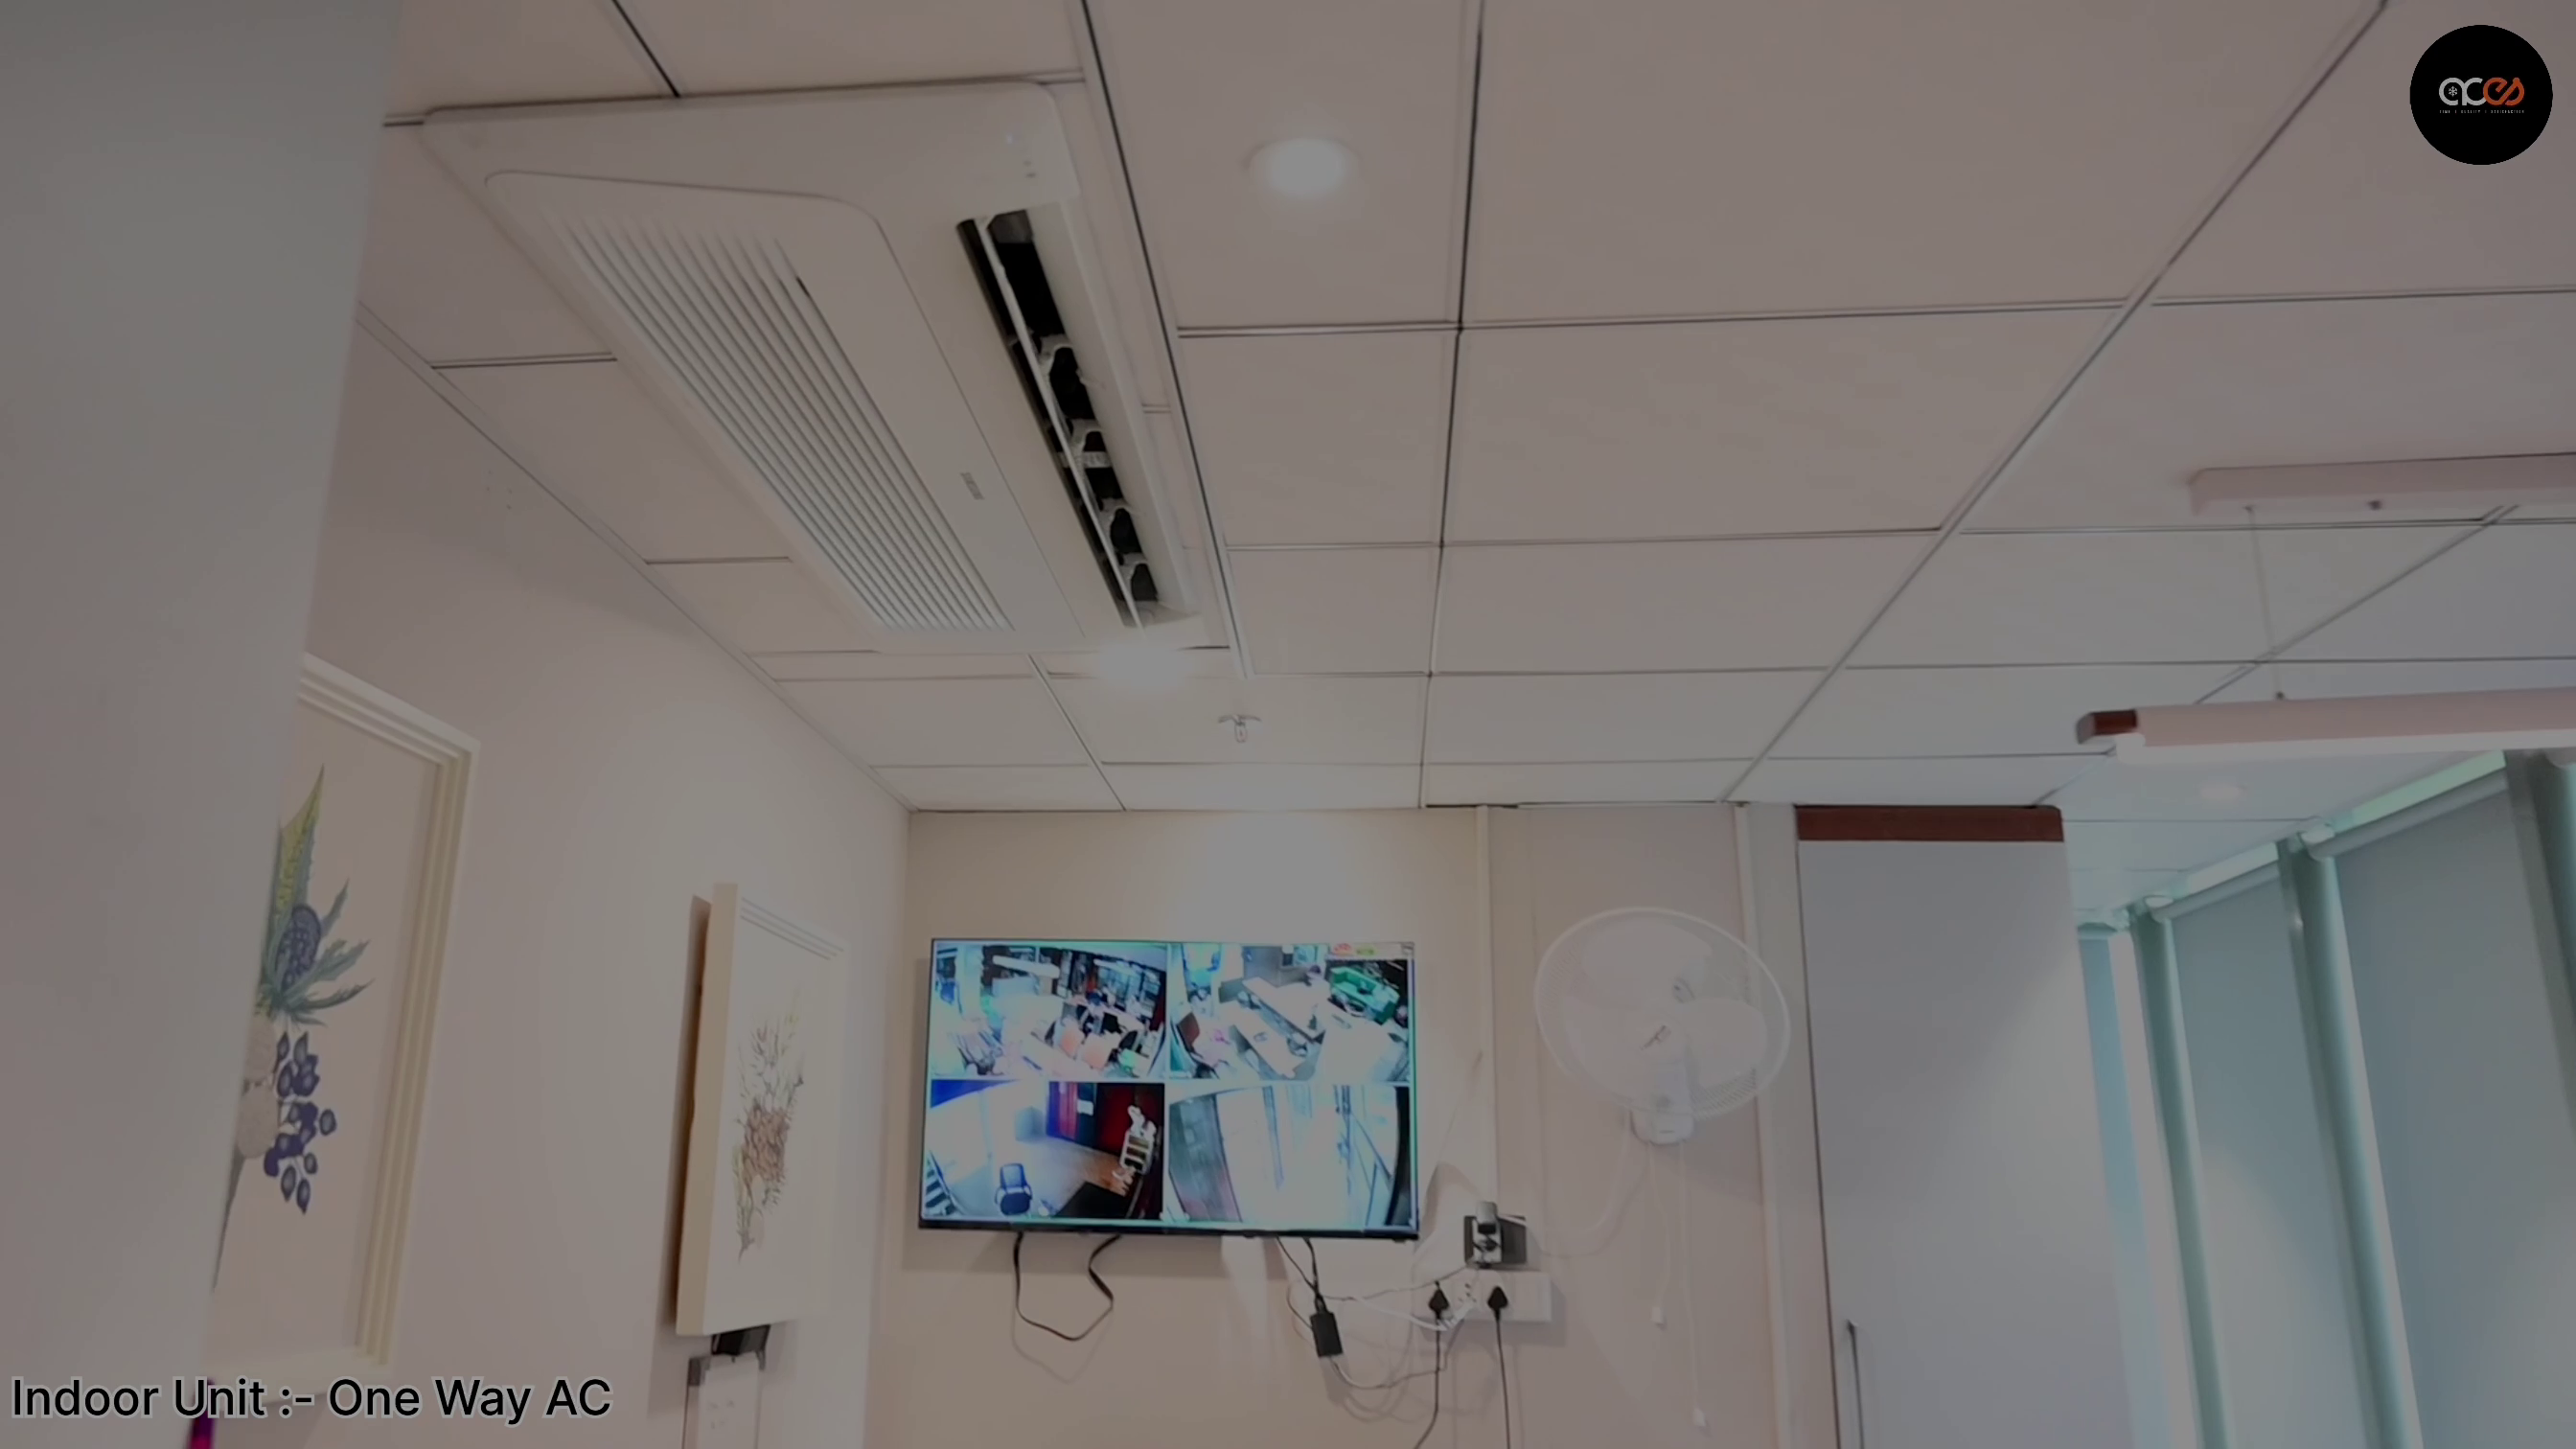 Samsung 1way cassette ac installed in office by ACES